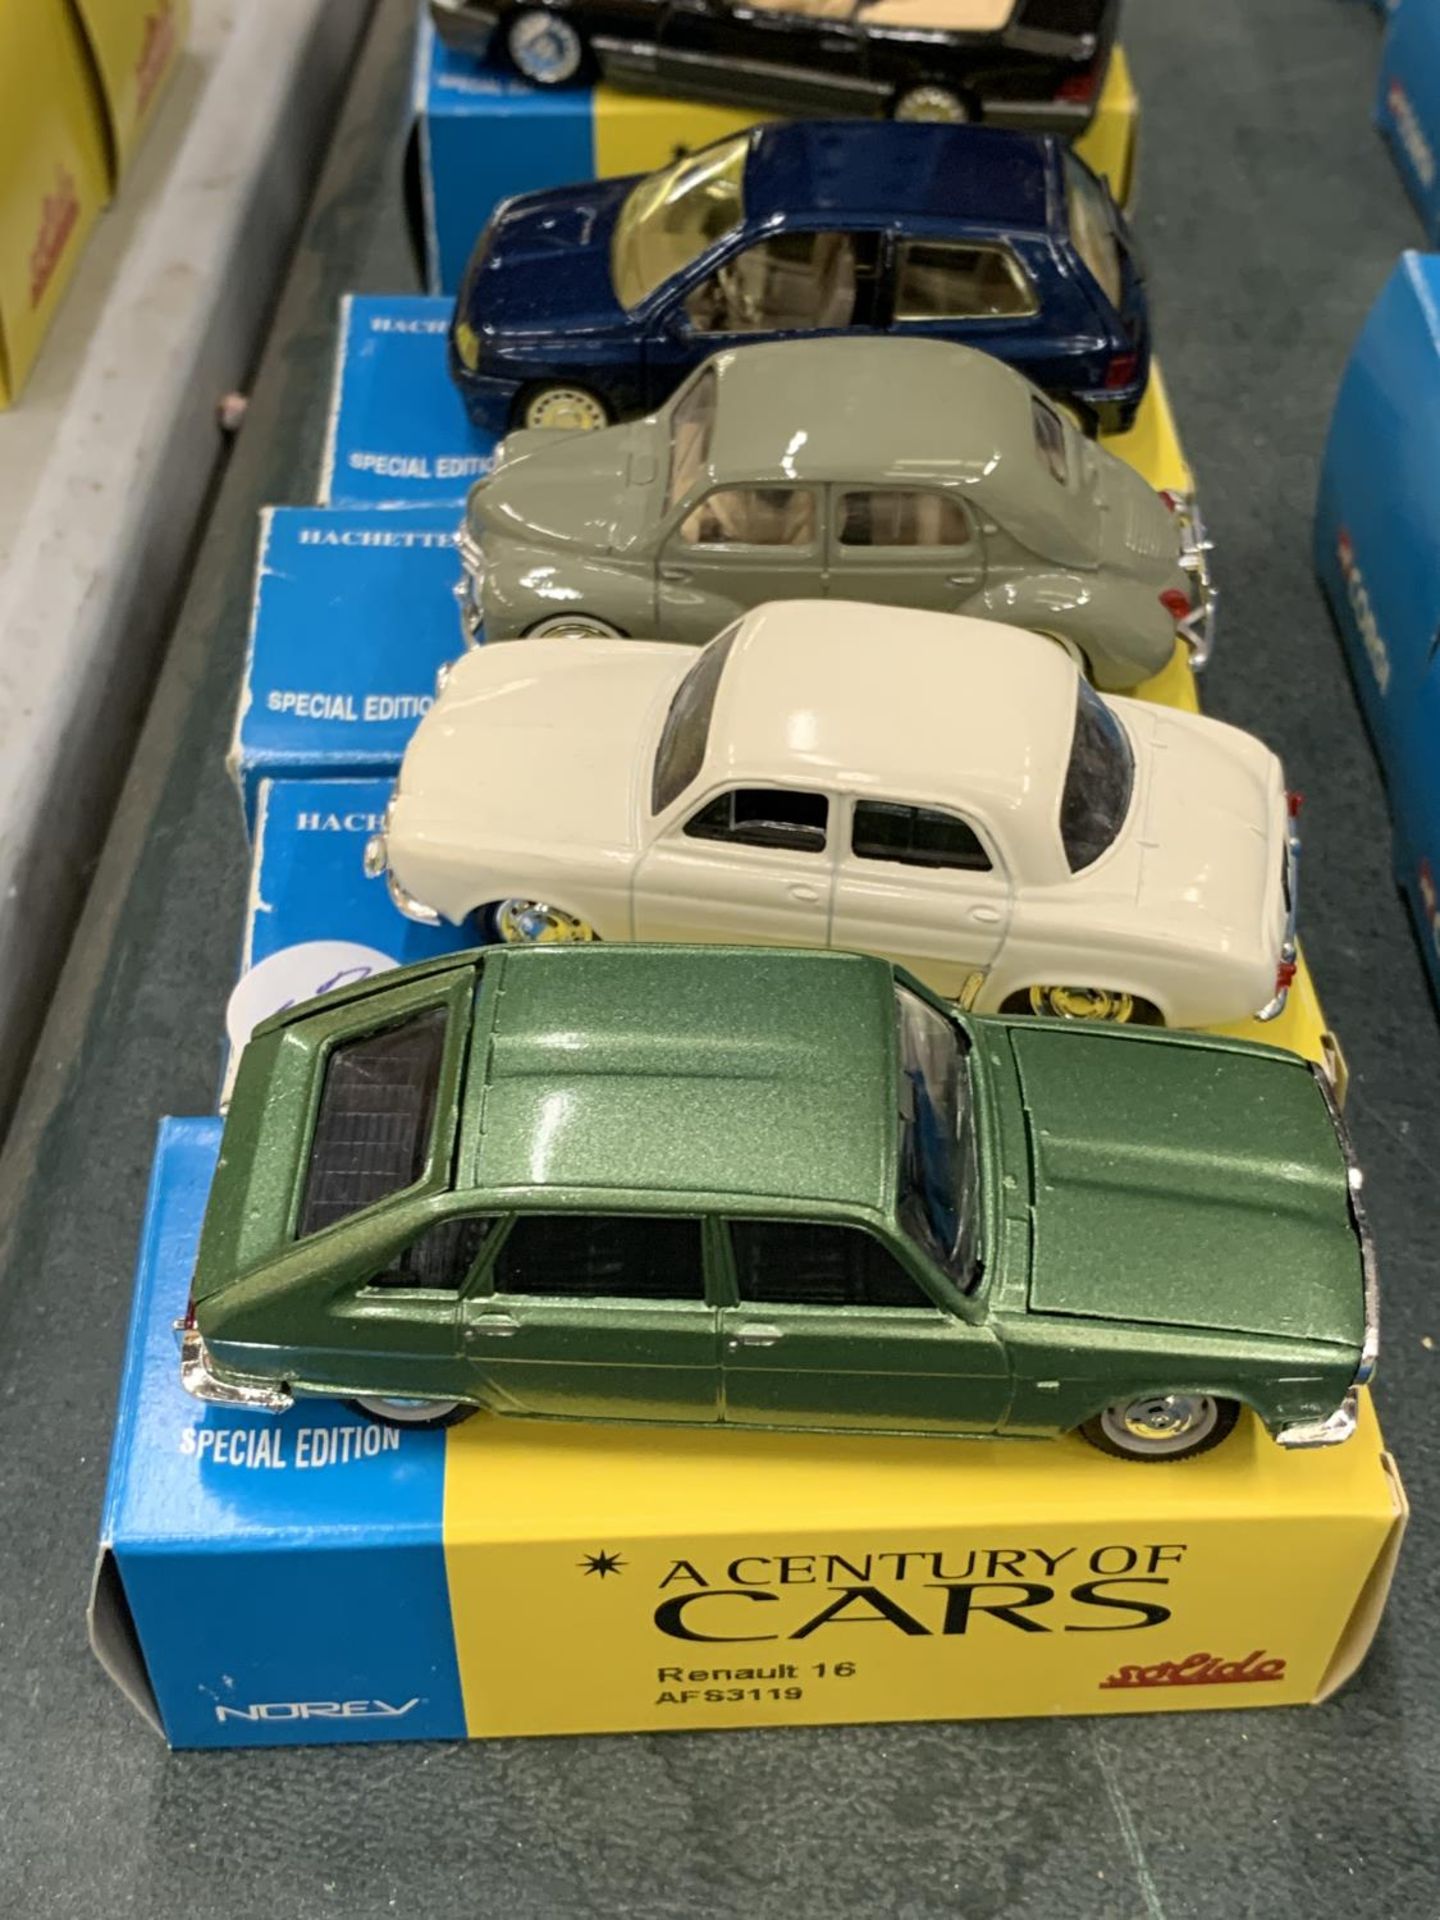 FOUR BOXED CORGI 'A CENTURY OF CARS' TO INCLUDE A RENAULT CLIO, 4 CV, 16 AND DAUPHINE